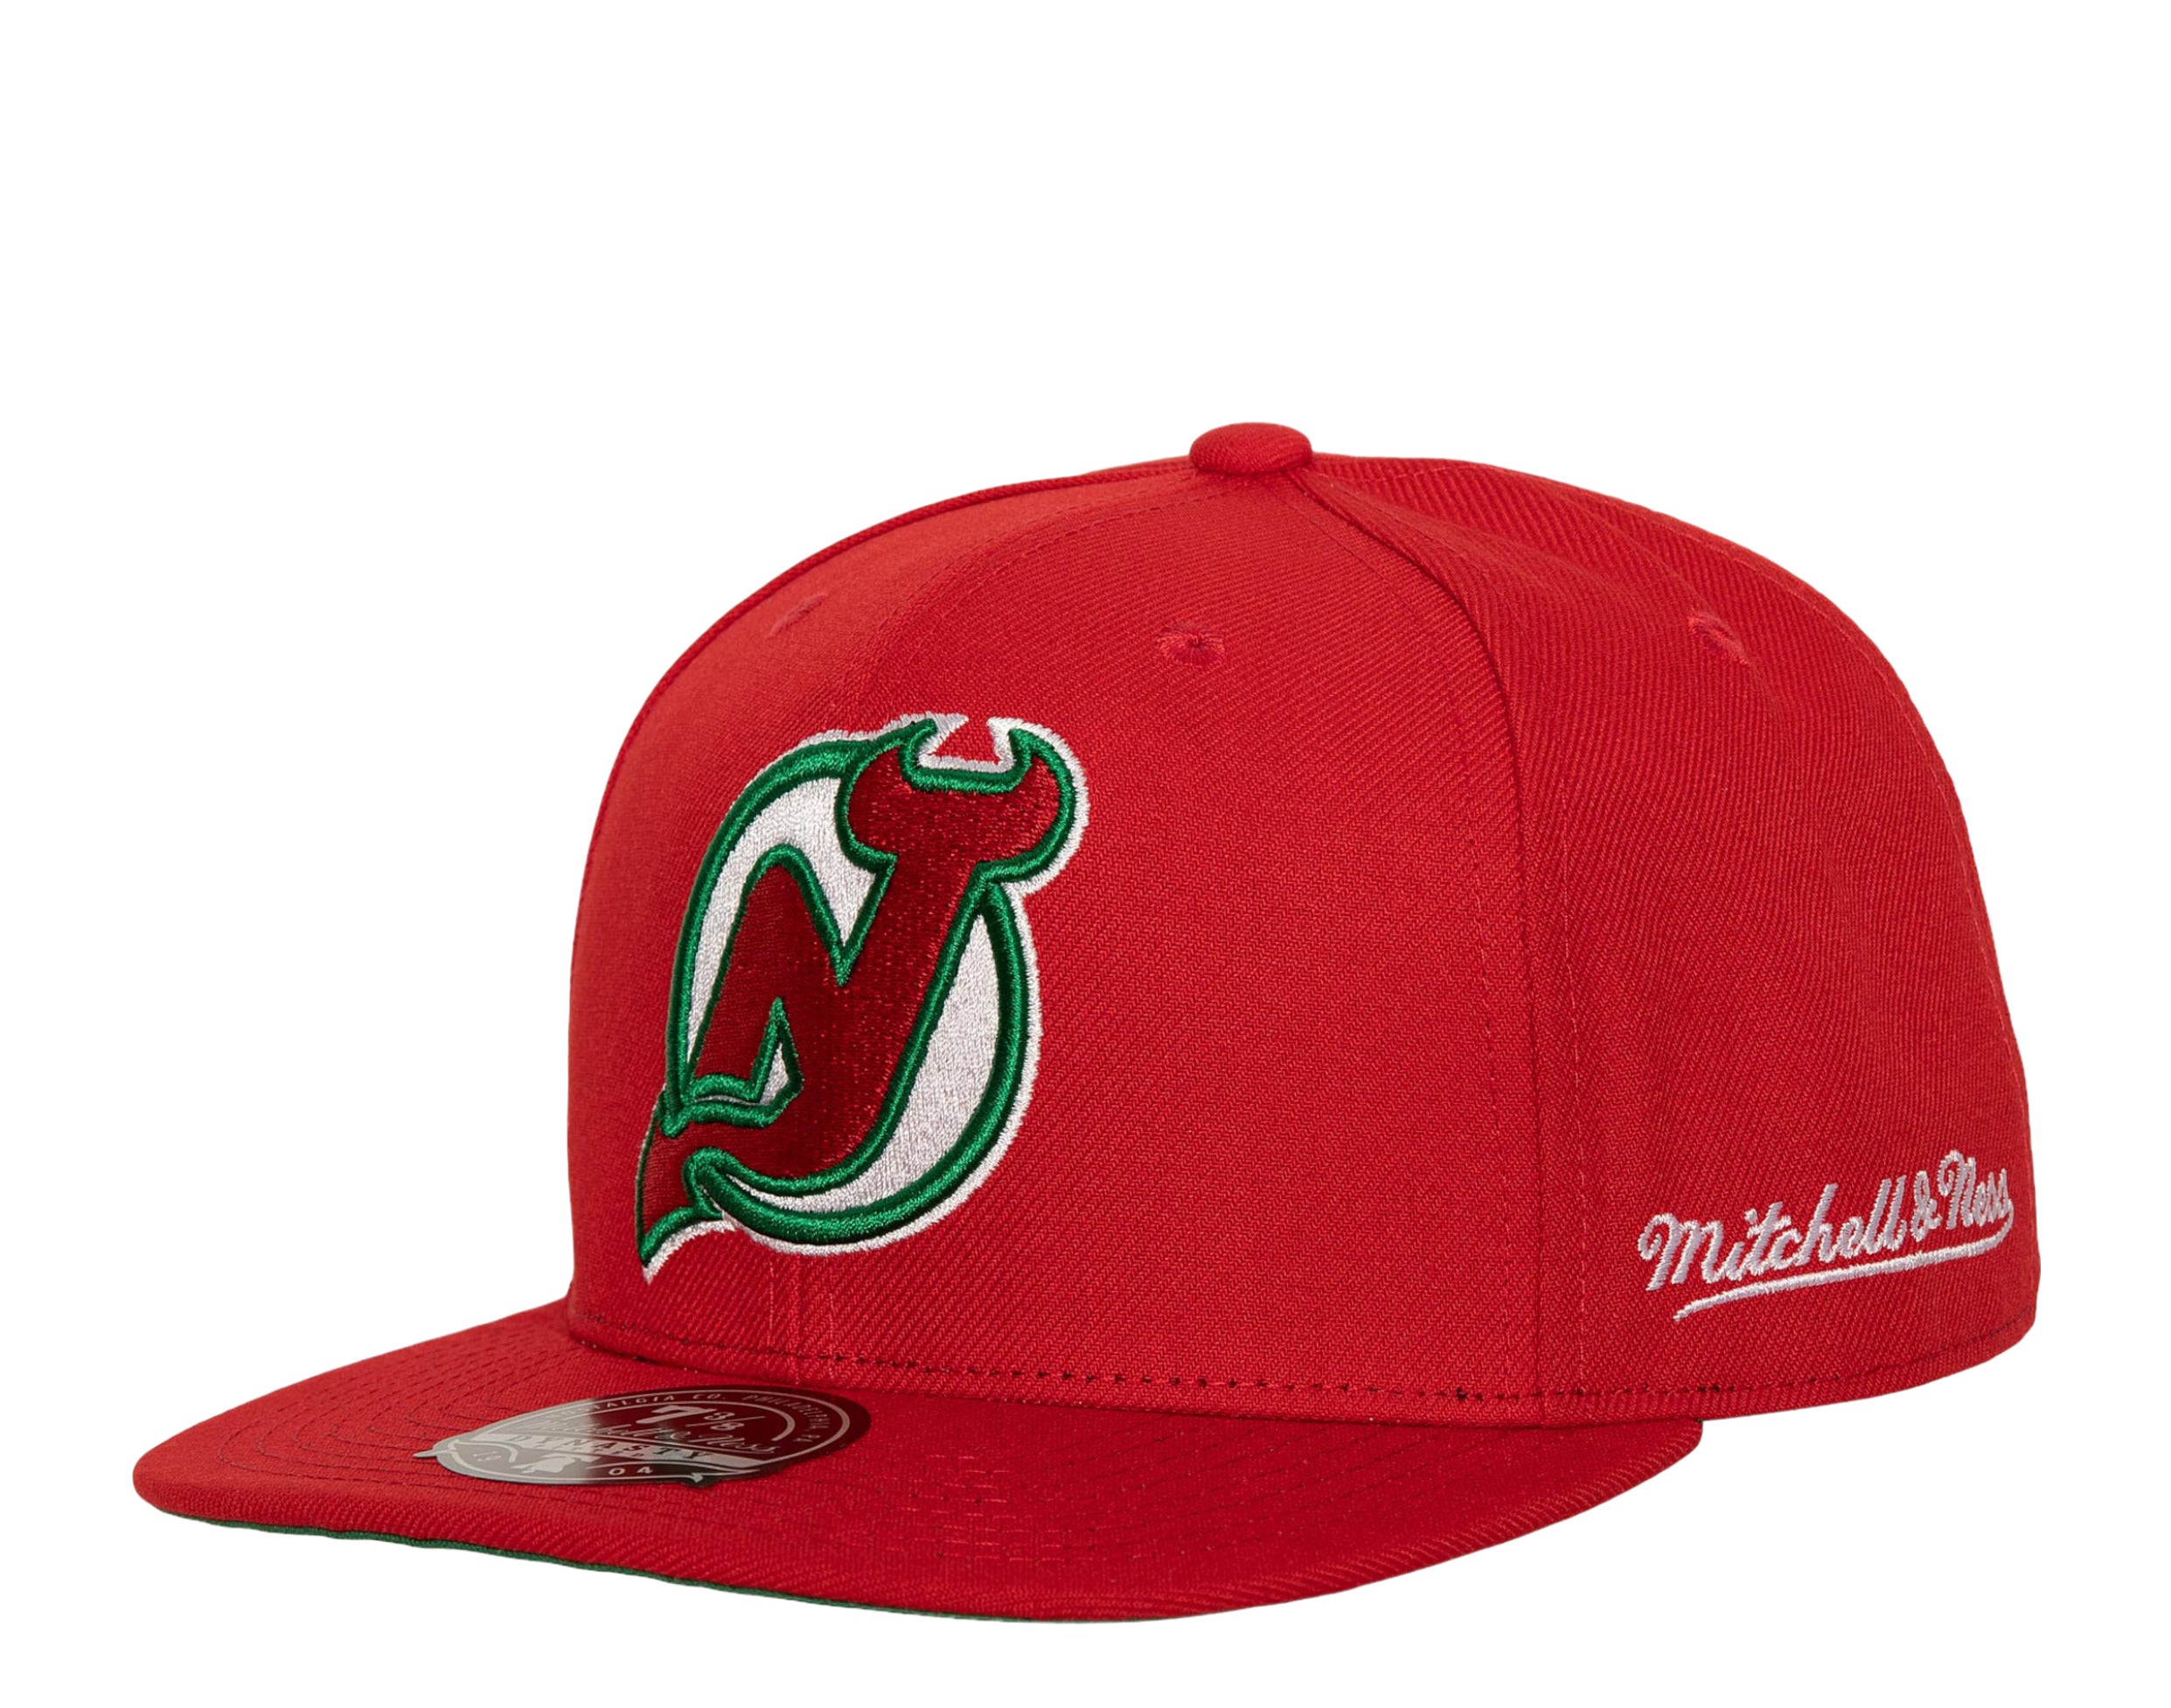 Mitchell & Ness New Jersey Devils Retrodome Snapback Hat, Men's, Red